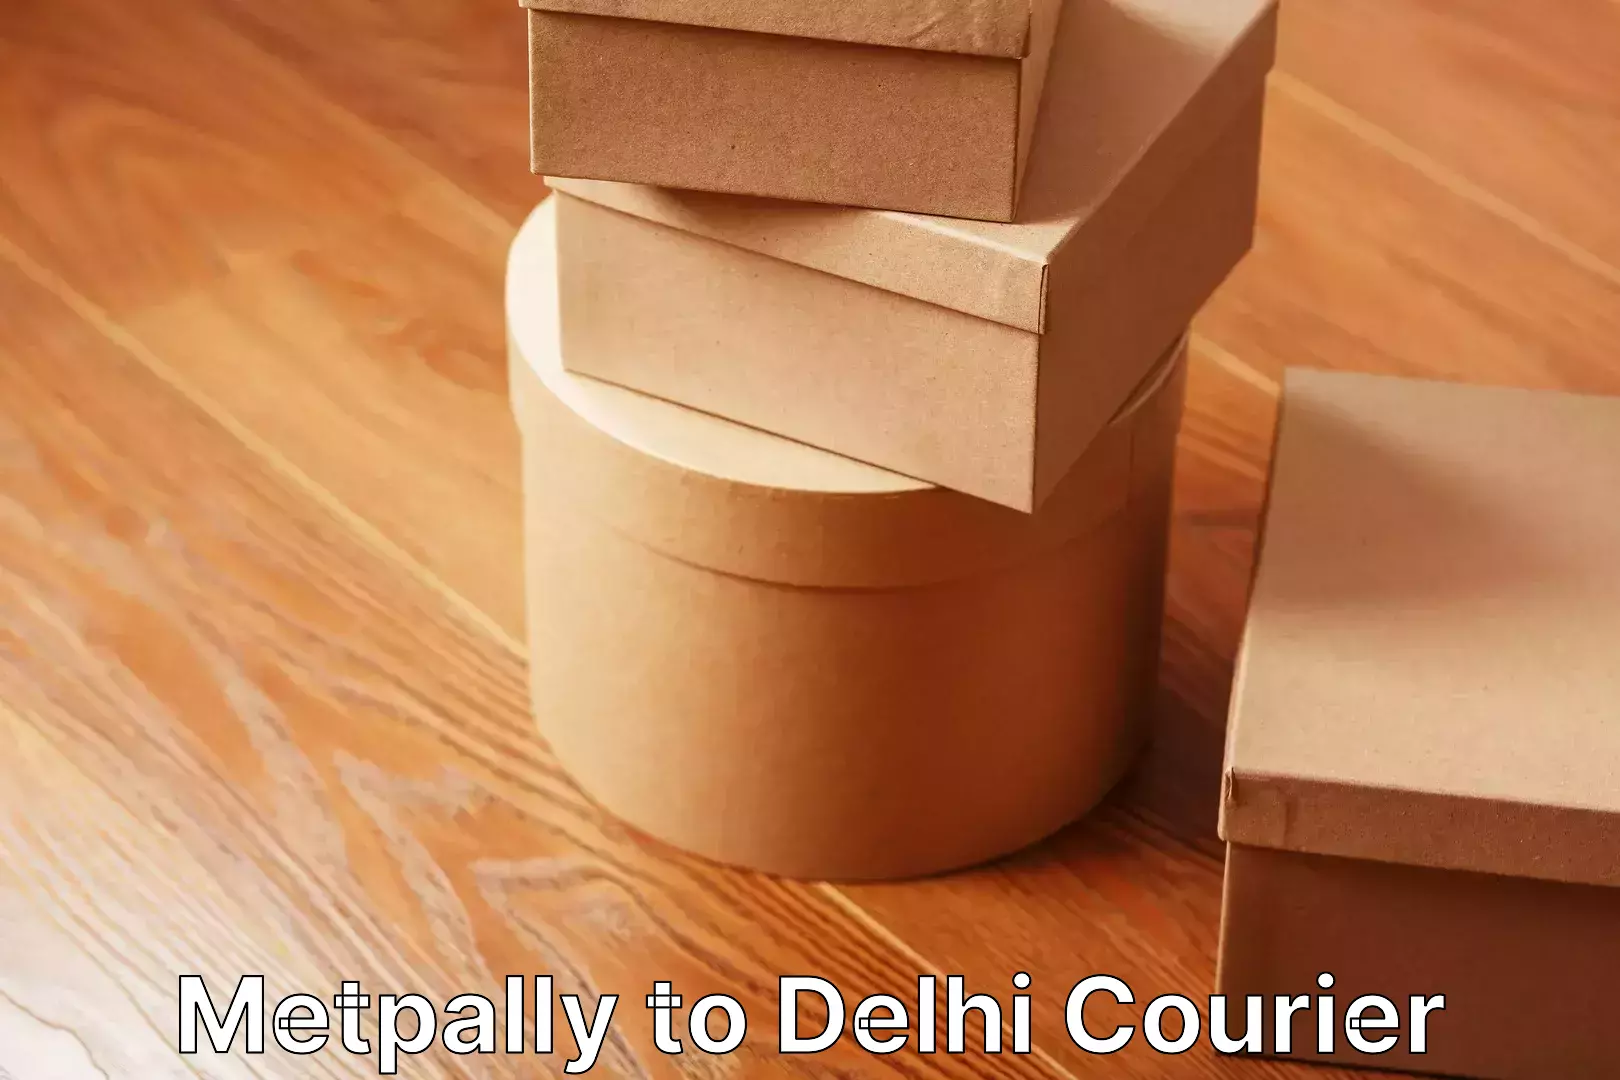 Home goods moving company Metpally to Delhi